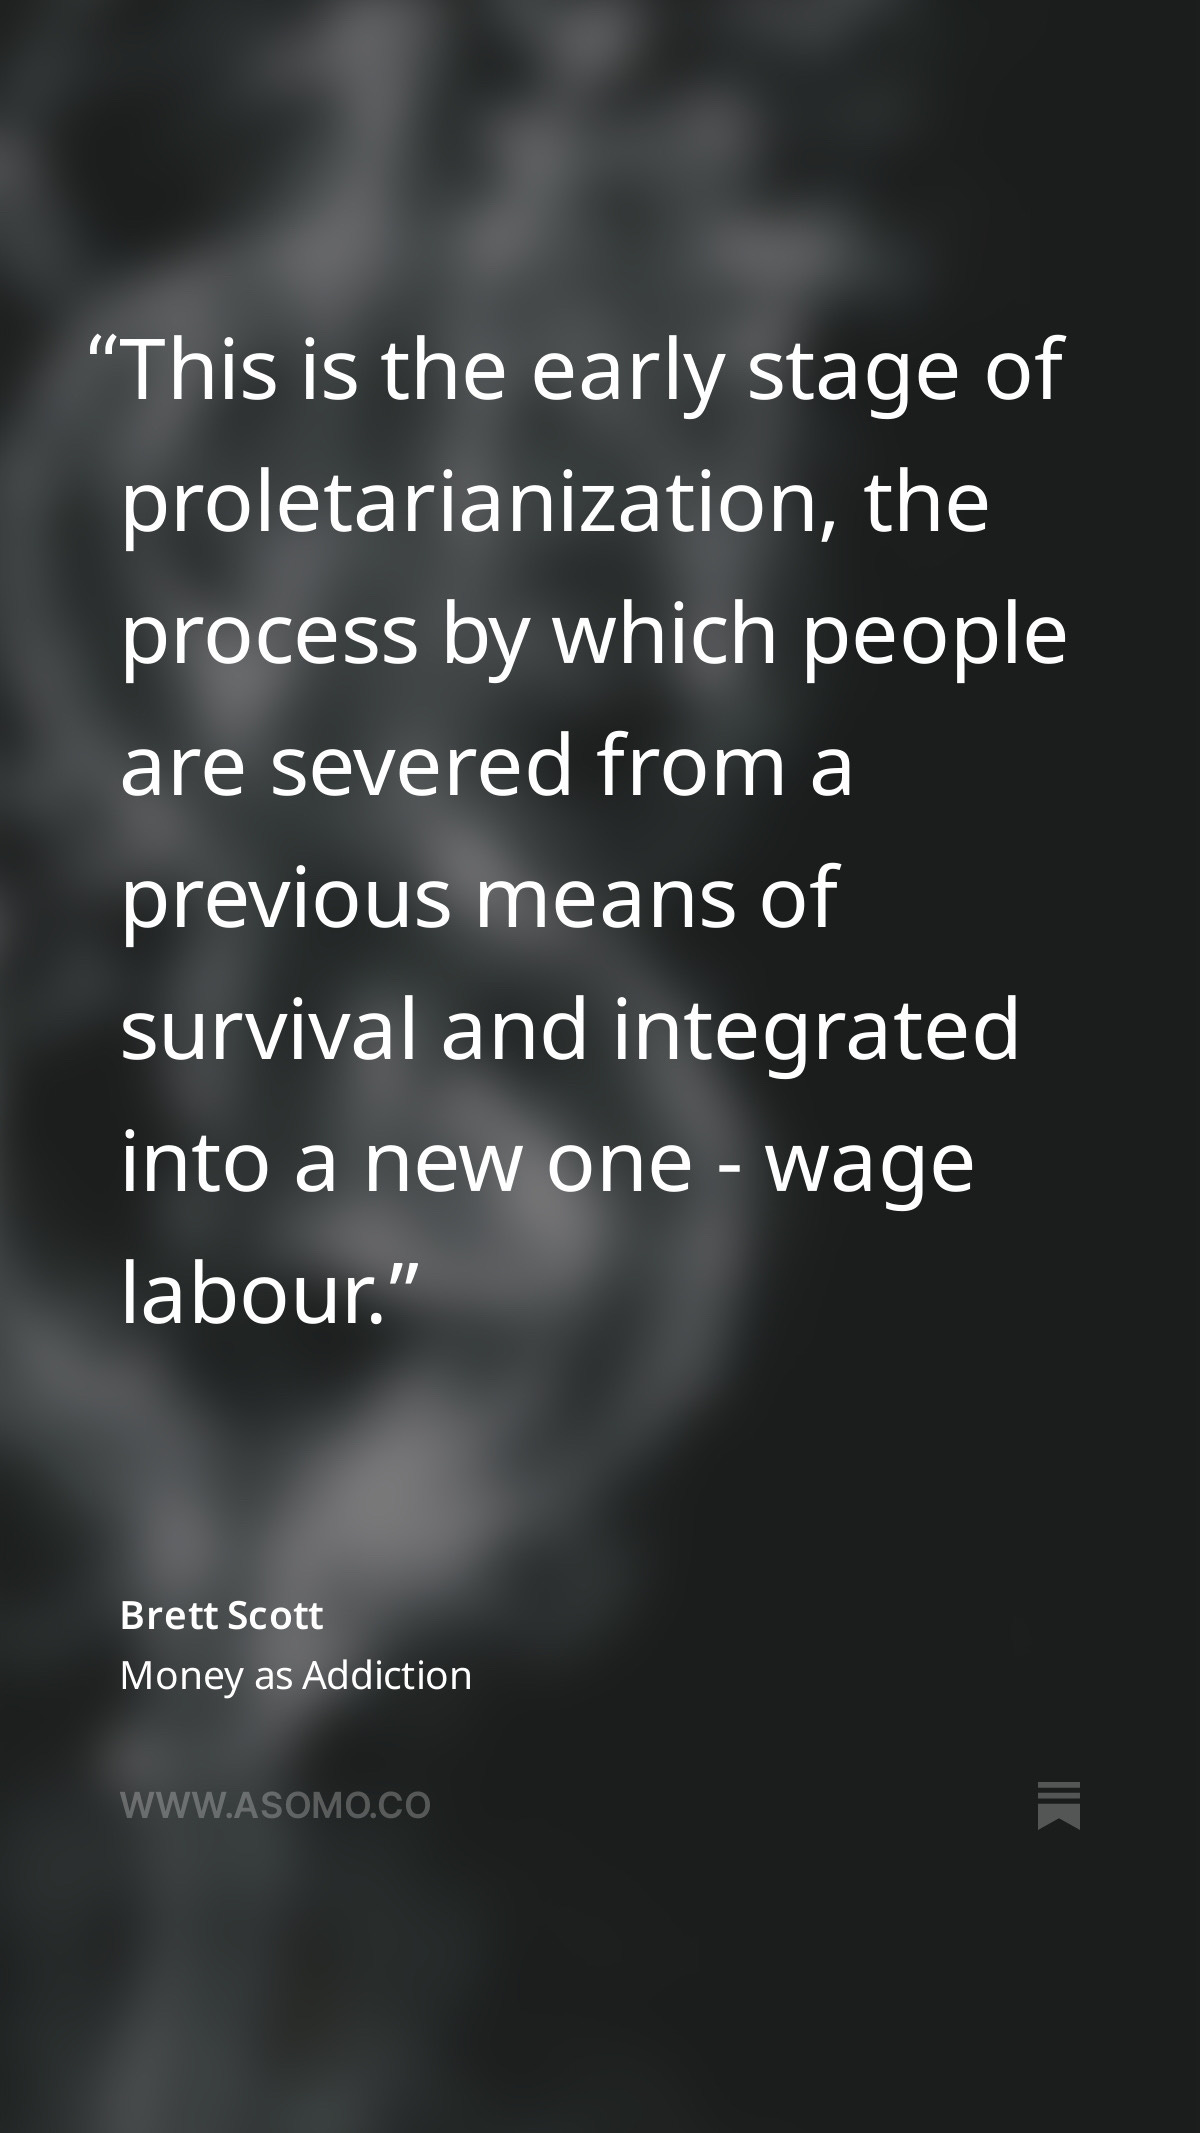 Quote from Brett Scott, Money as Addiction: "This is the early stage of proletarianization, the process by which people are severed from a previous means of survival and integrated into a new one - wage labor."